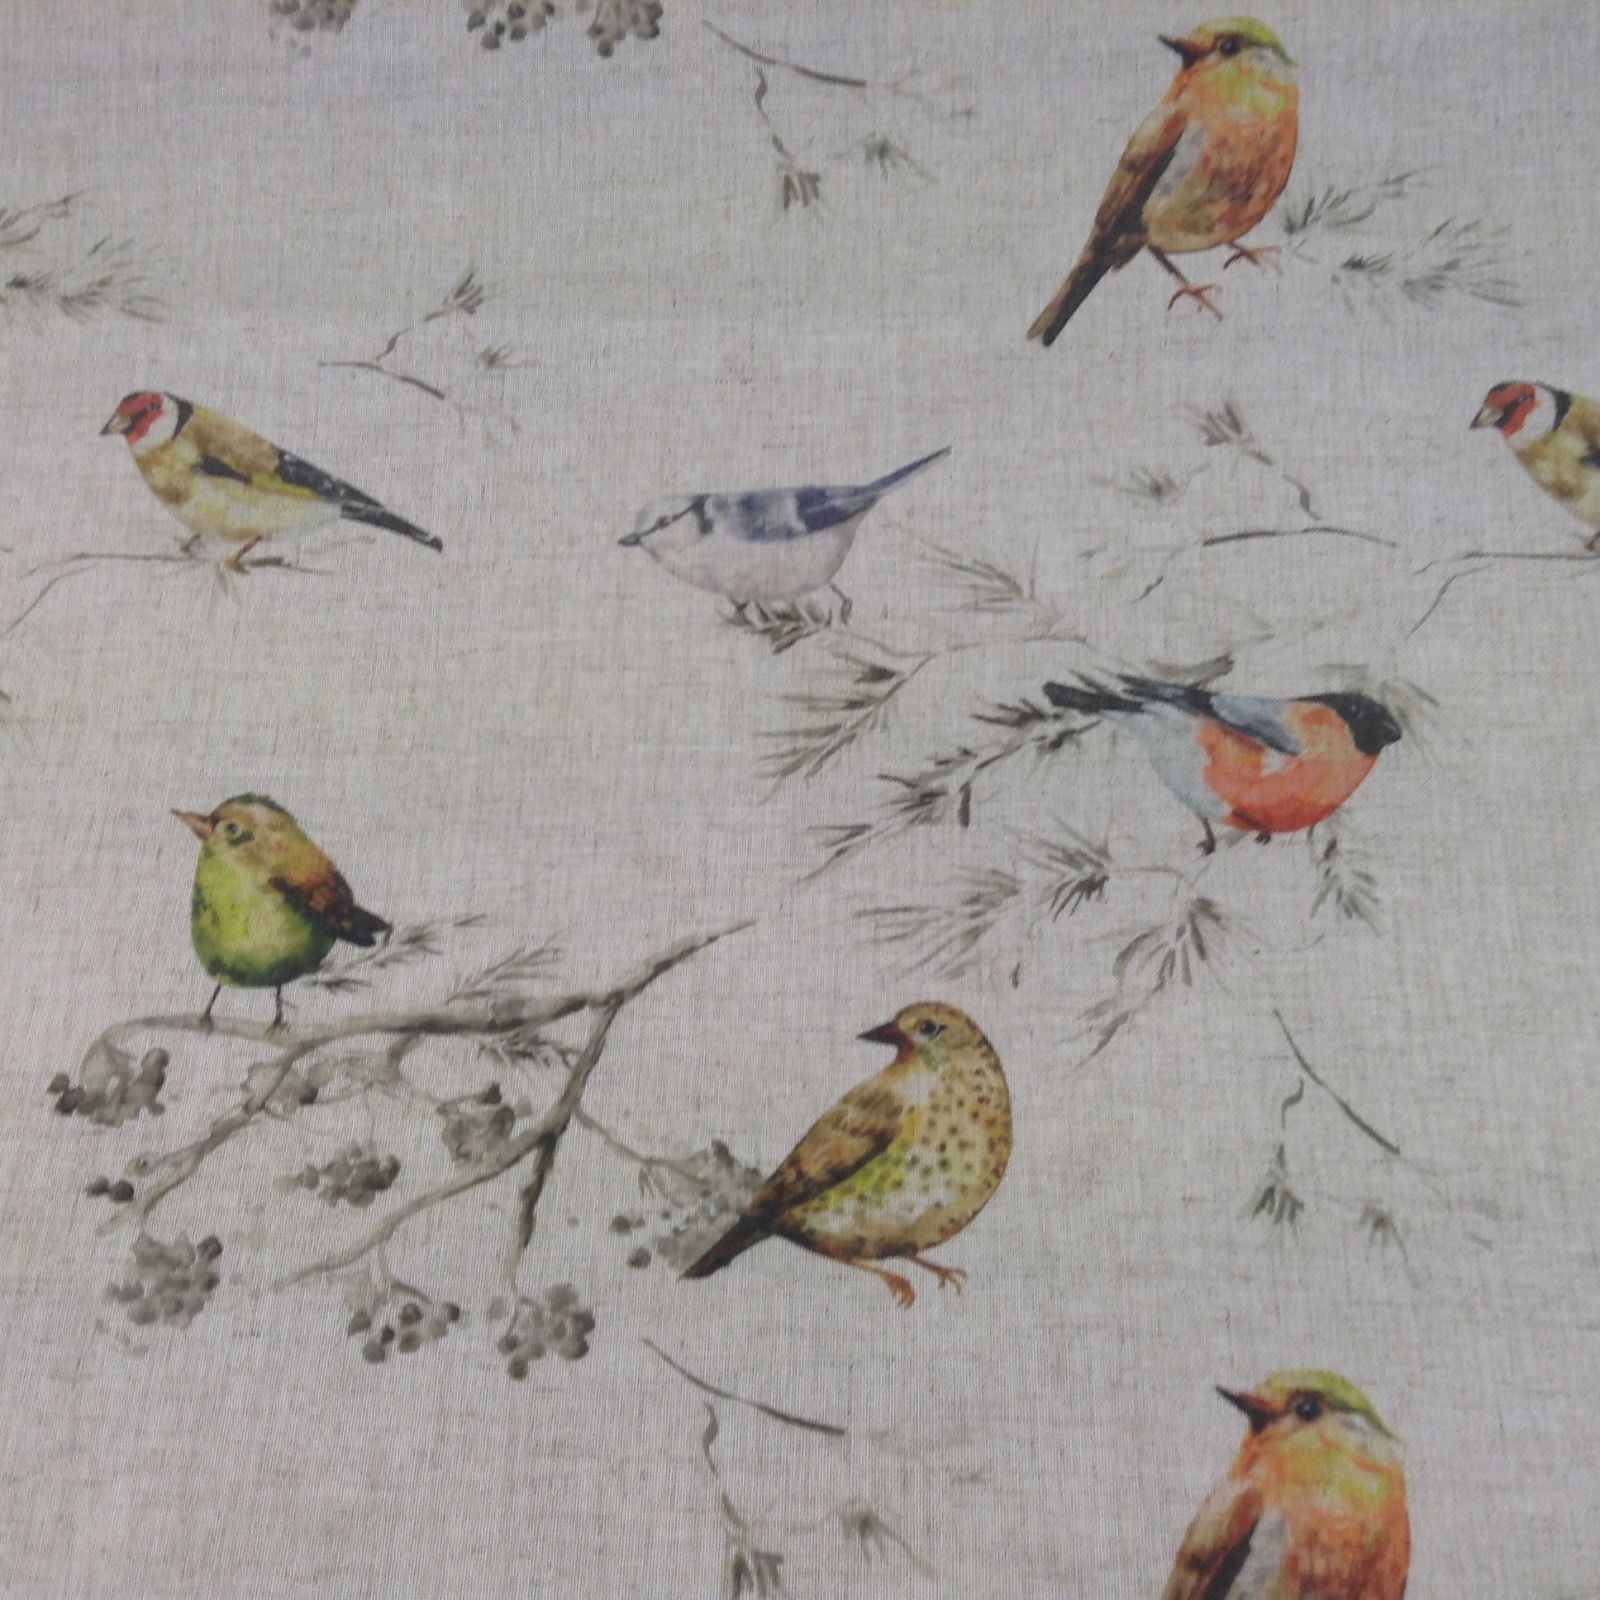 Chinese  Birds Linen Volie Curtain/Craft Fabric (sample or metre)